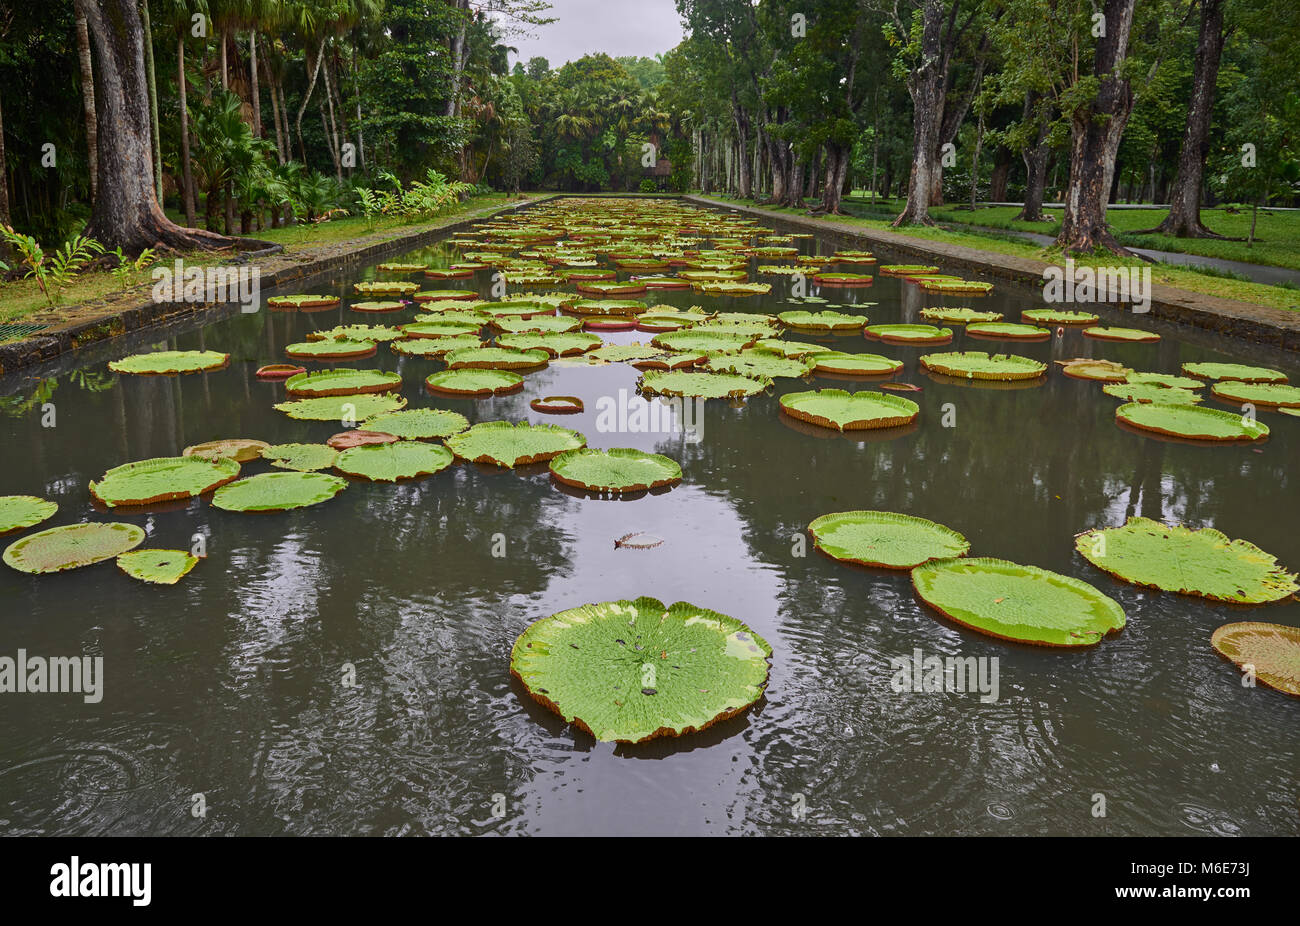 The Lily Ponds at the Botanical Gardens in Mauritius seen on an overcast day, with the Lily Pads floating serenely on the water. Stock Photo